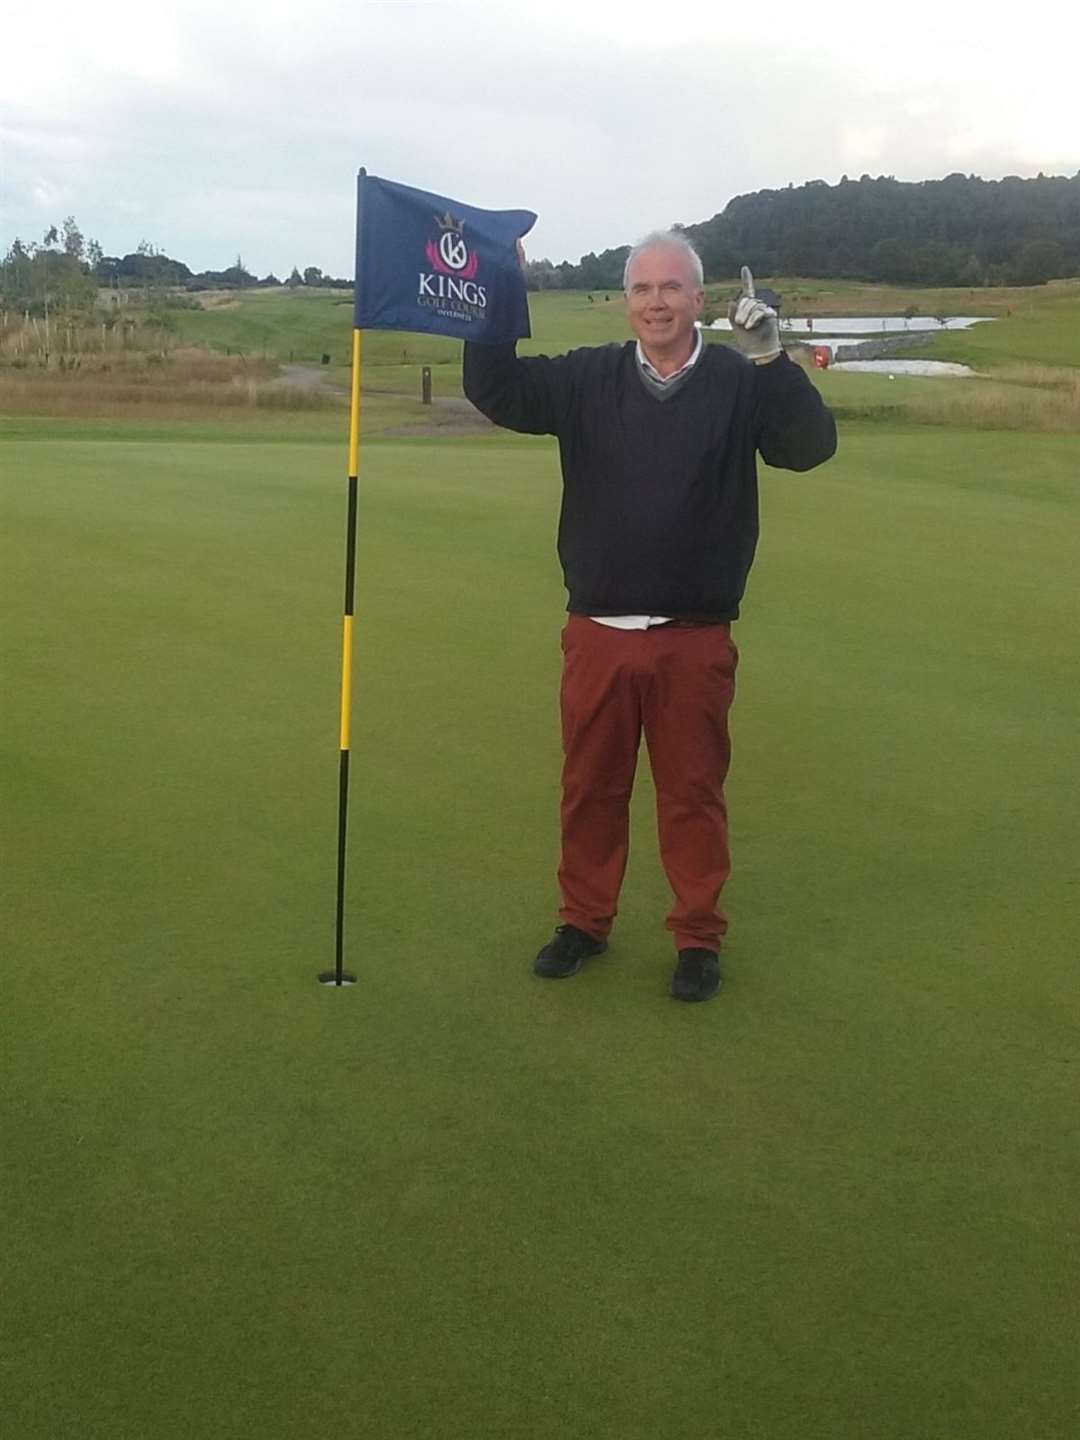 Eric Barron got the first hole-in-one at Kings Golf Club on the 170-yard 16th hole. .